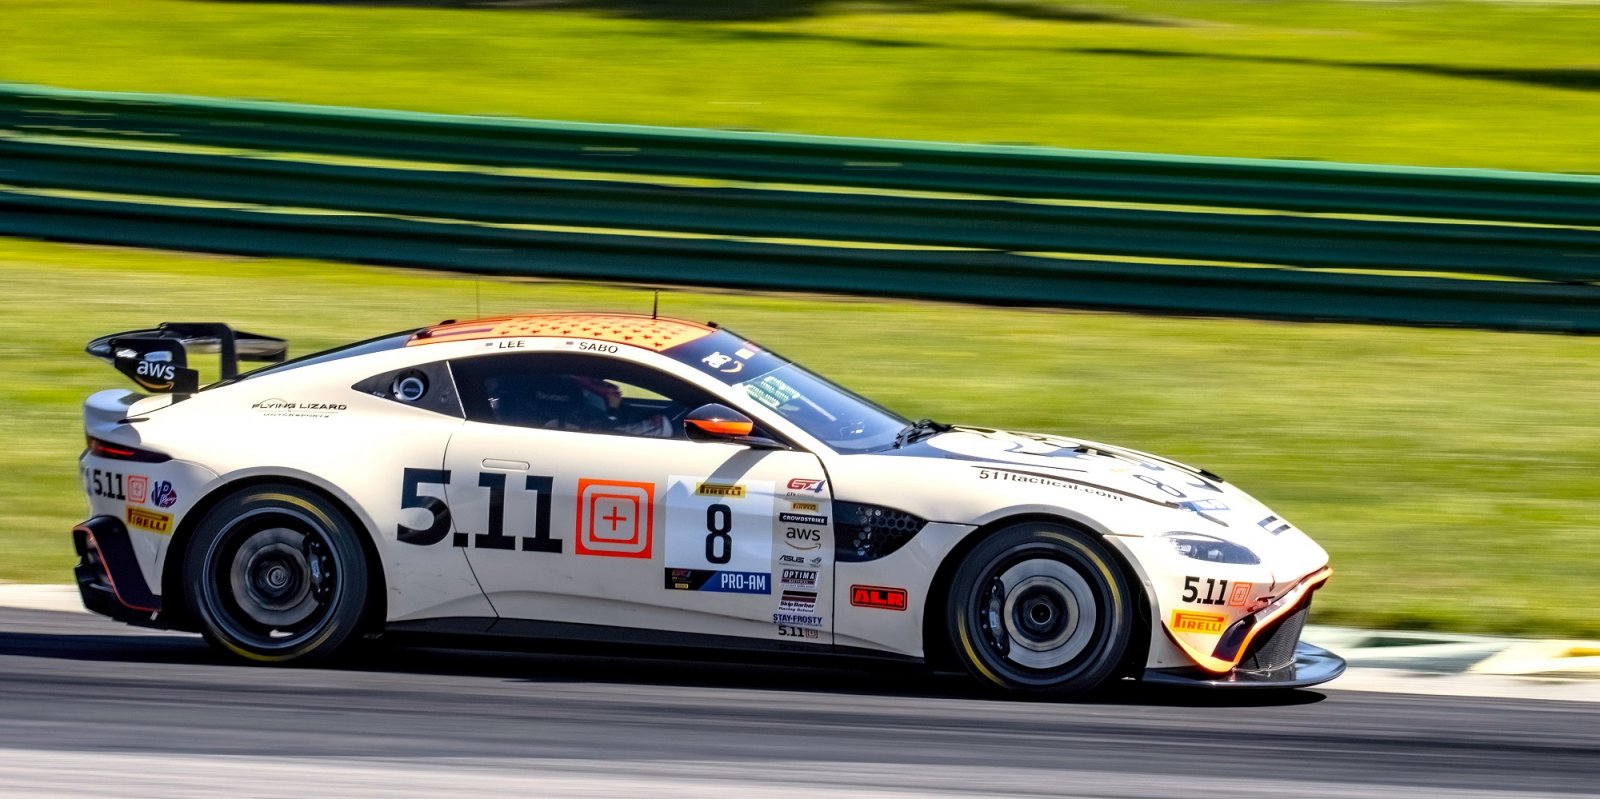 Extreme Weather Cuts Friday Plans Short for Pirelli GT4 America